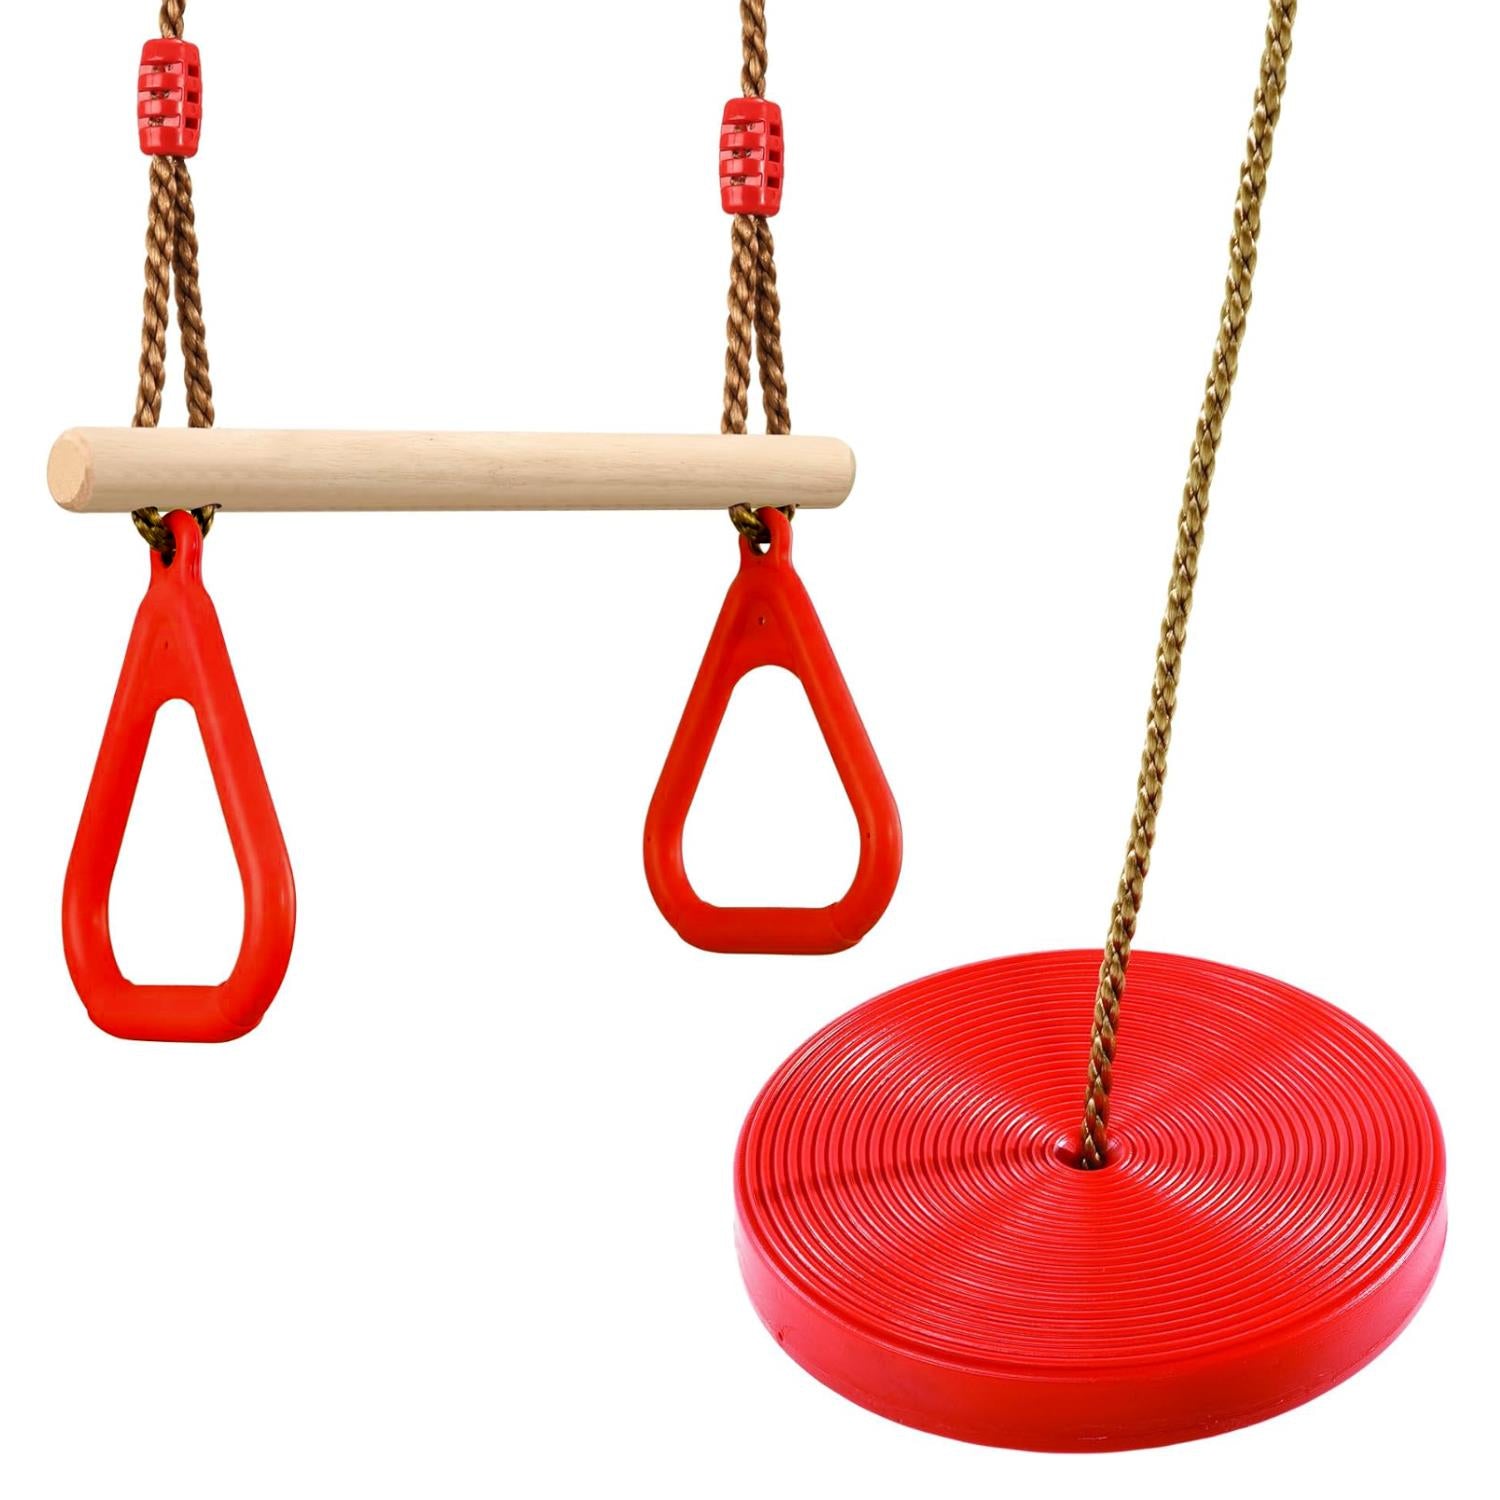 The Magic Toy Shop Wooden Trapeze Swing, Rope Ladder & Red Plate Seat